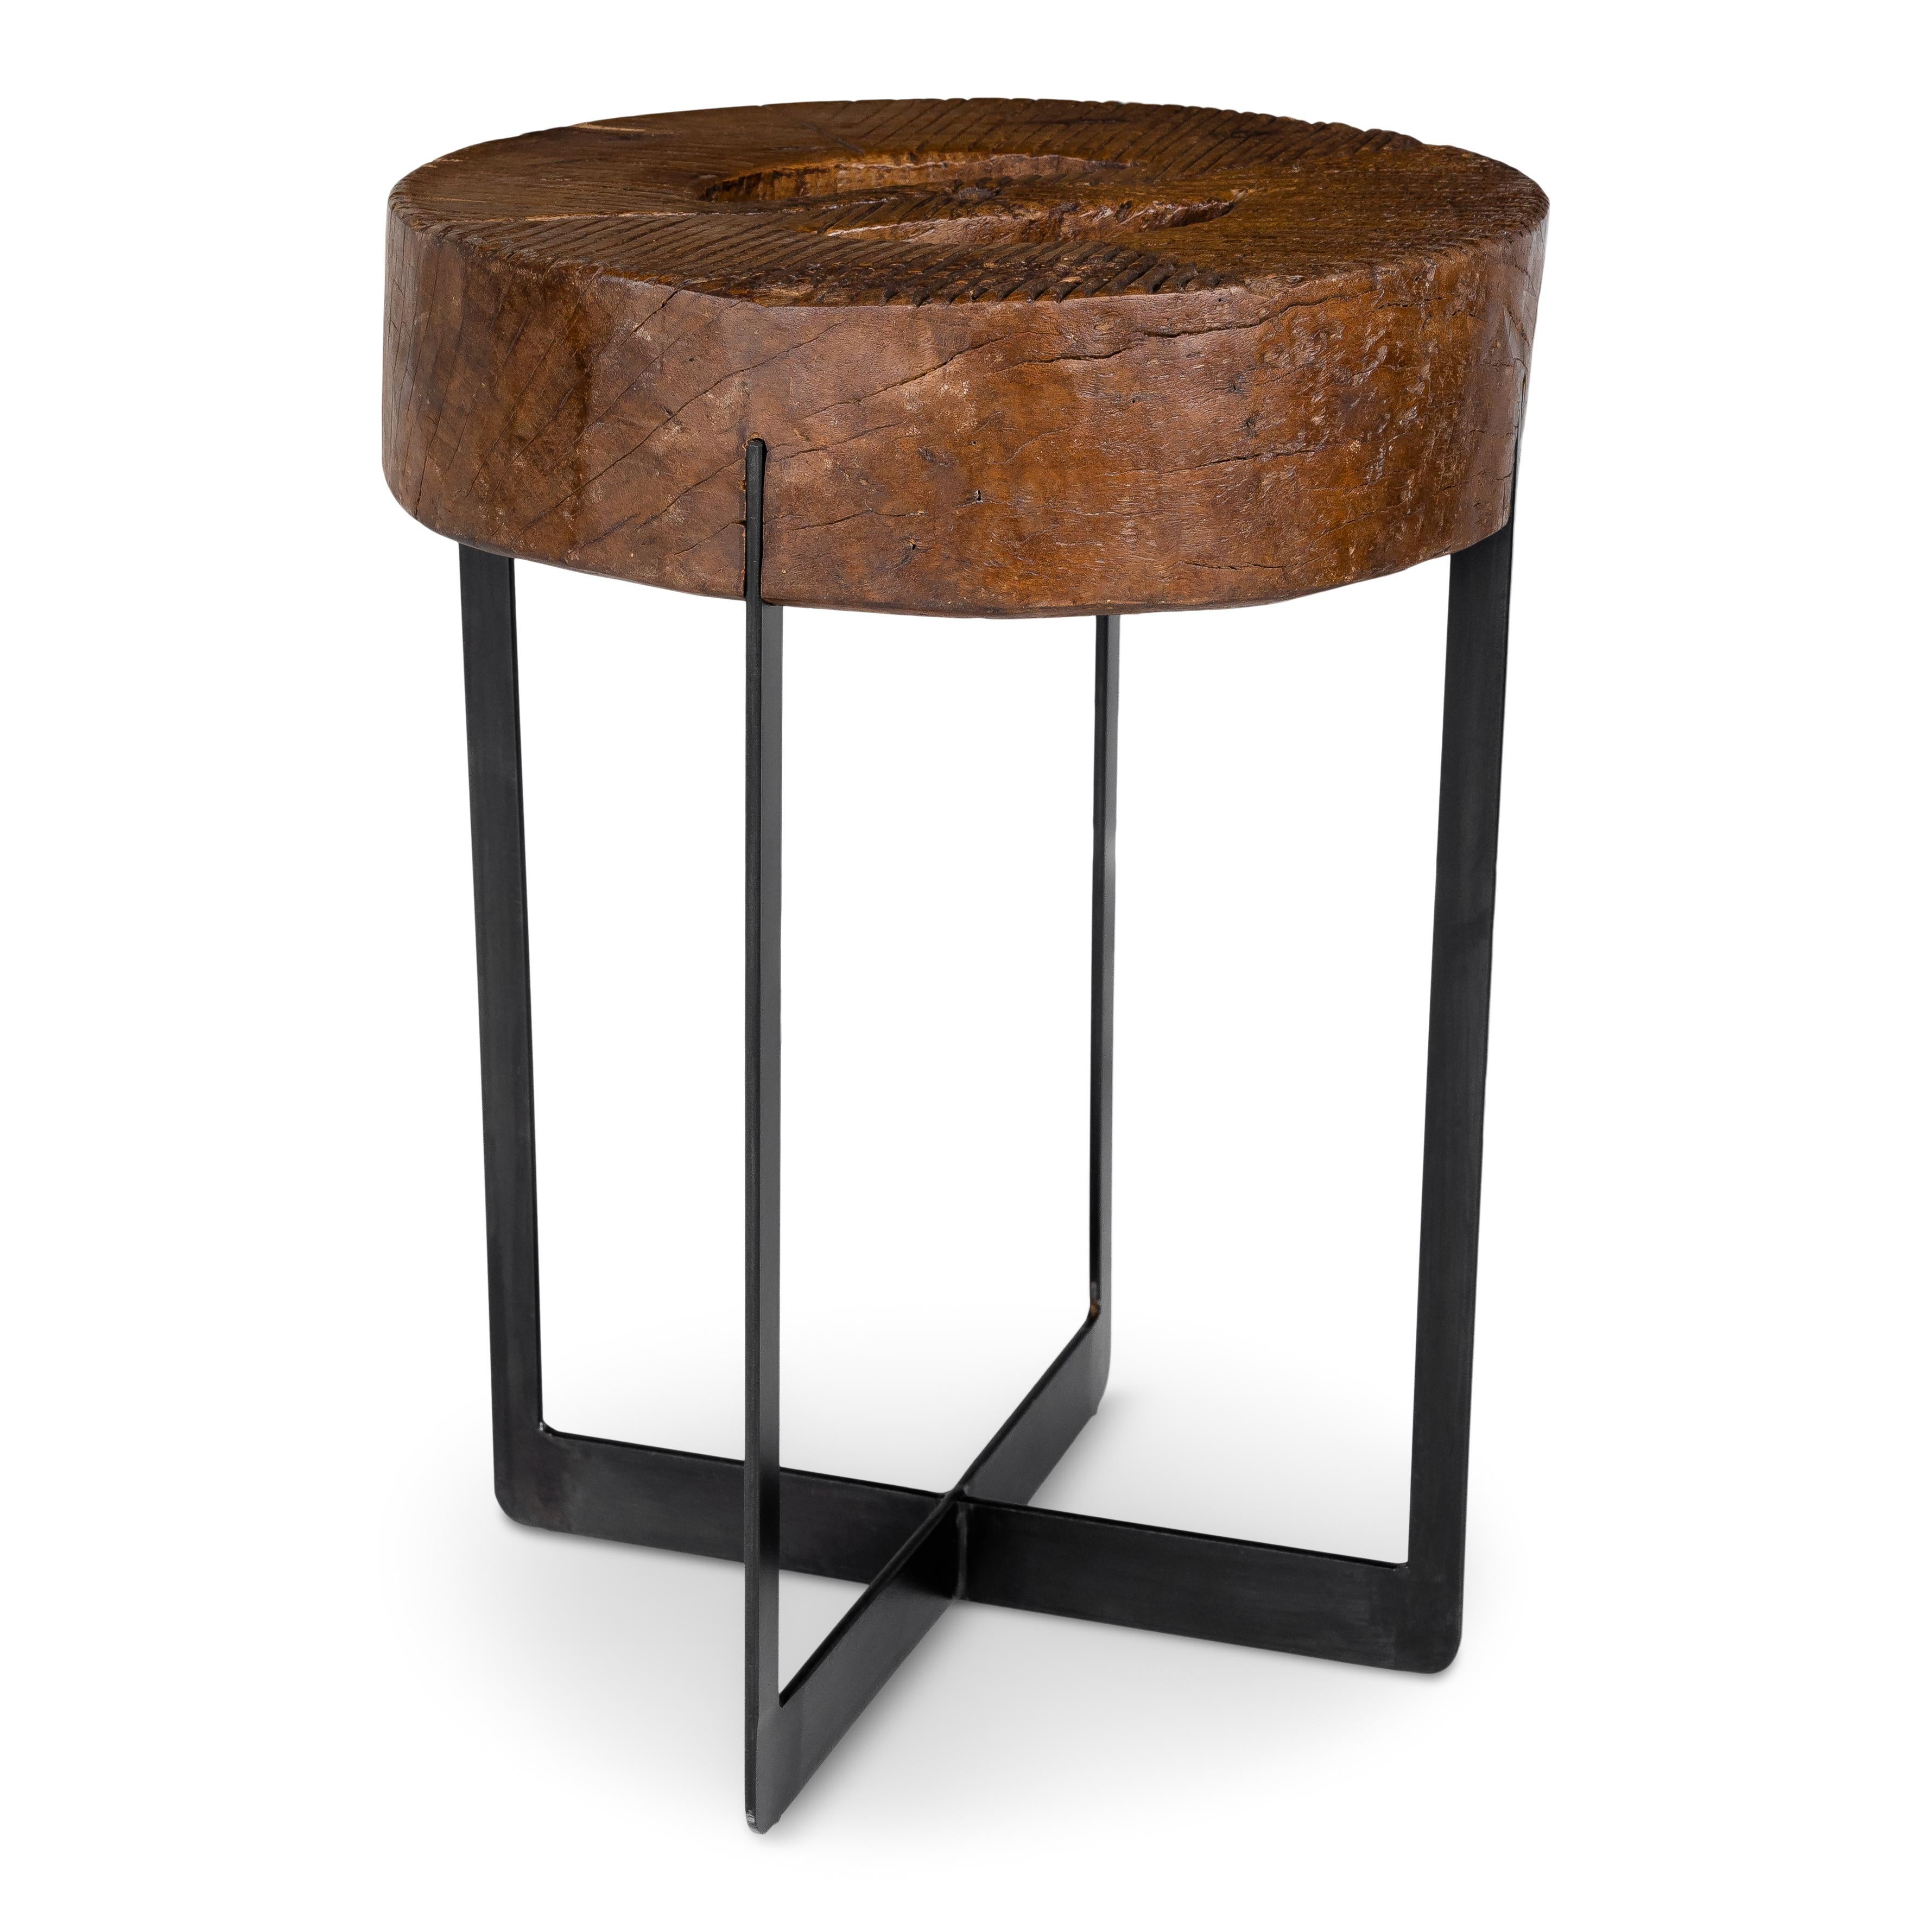 Bailhese wooden mill wheel on ebony patina steel base offers great texture, coloring, and a rustic industrial feel. 

This piece is a part of Brendan Bass’s one-of-a-kind collection, Le Monde. French for “The World”, the Le Monde collection is made